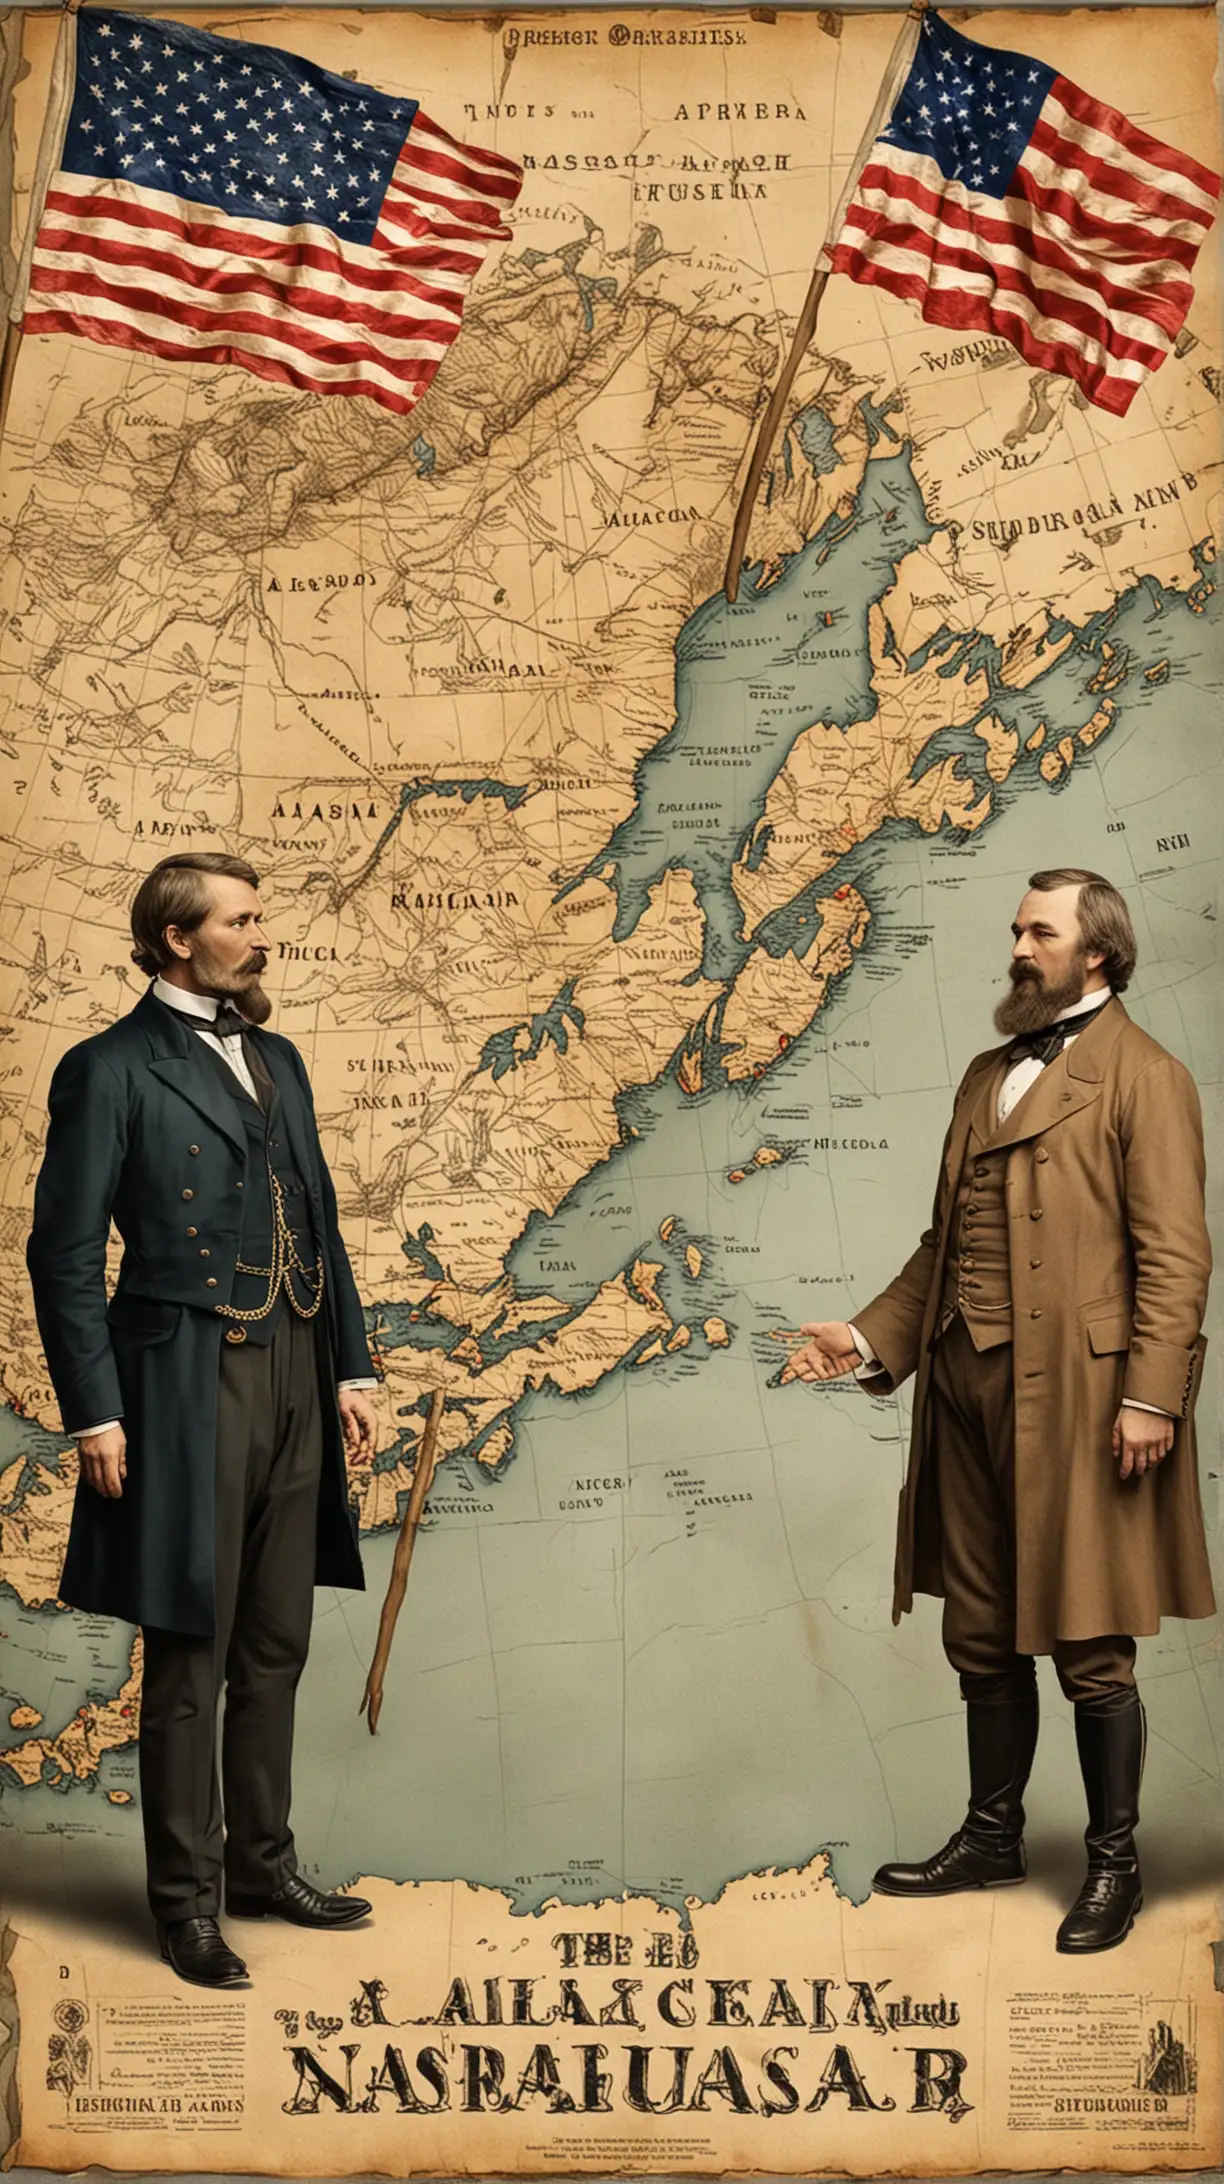 Create an image that depicts the historical event known as the 'Alaska Purchase'. Show a scene where representatives from Russia and the United States are negotiating the sale of Alaska. Include iconic elements such as Russian and American flags, a map showing the territory of Alaska, and historical figures like Tsar Alexander II and Secretary of State William Seward. The setting should convey the atmosphere of diplomacy and negotiation, with both parties engaged in discussions. The image should capture the significance of this event in shaping the geopolitical landscape of North America.